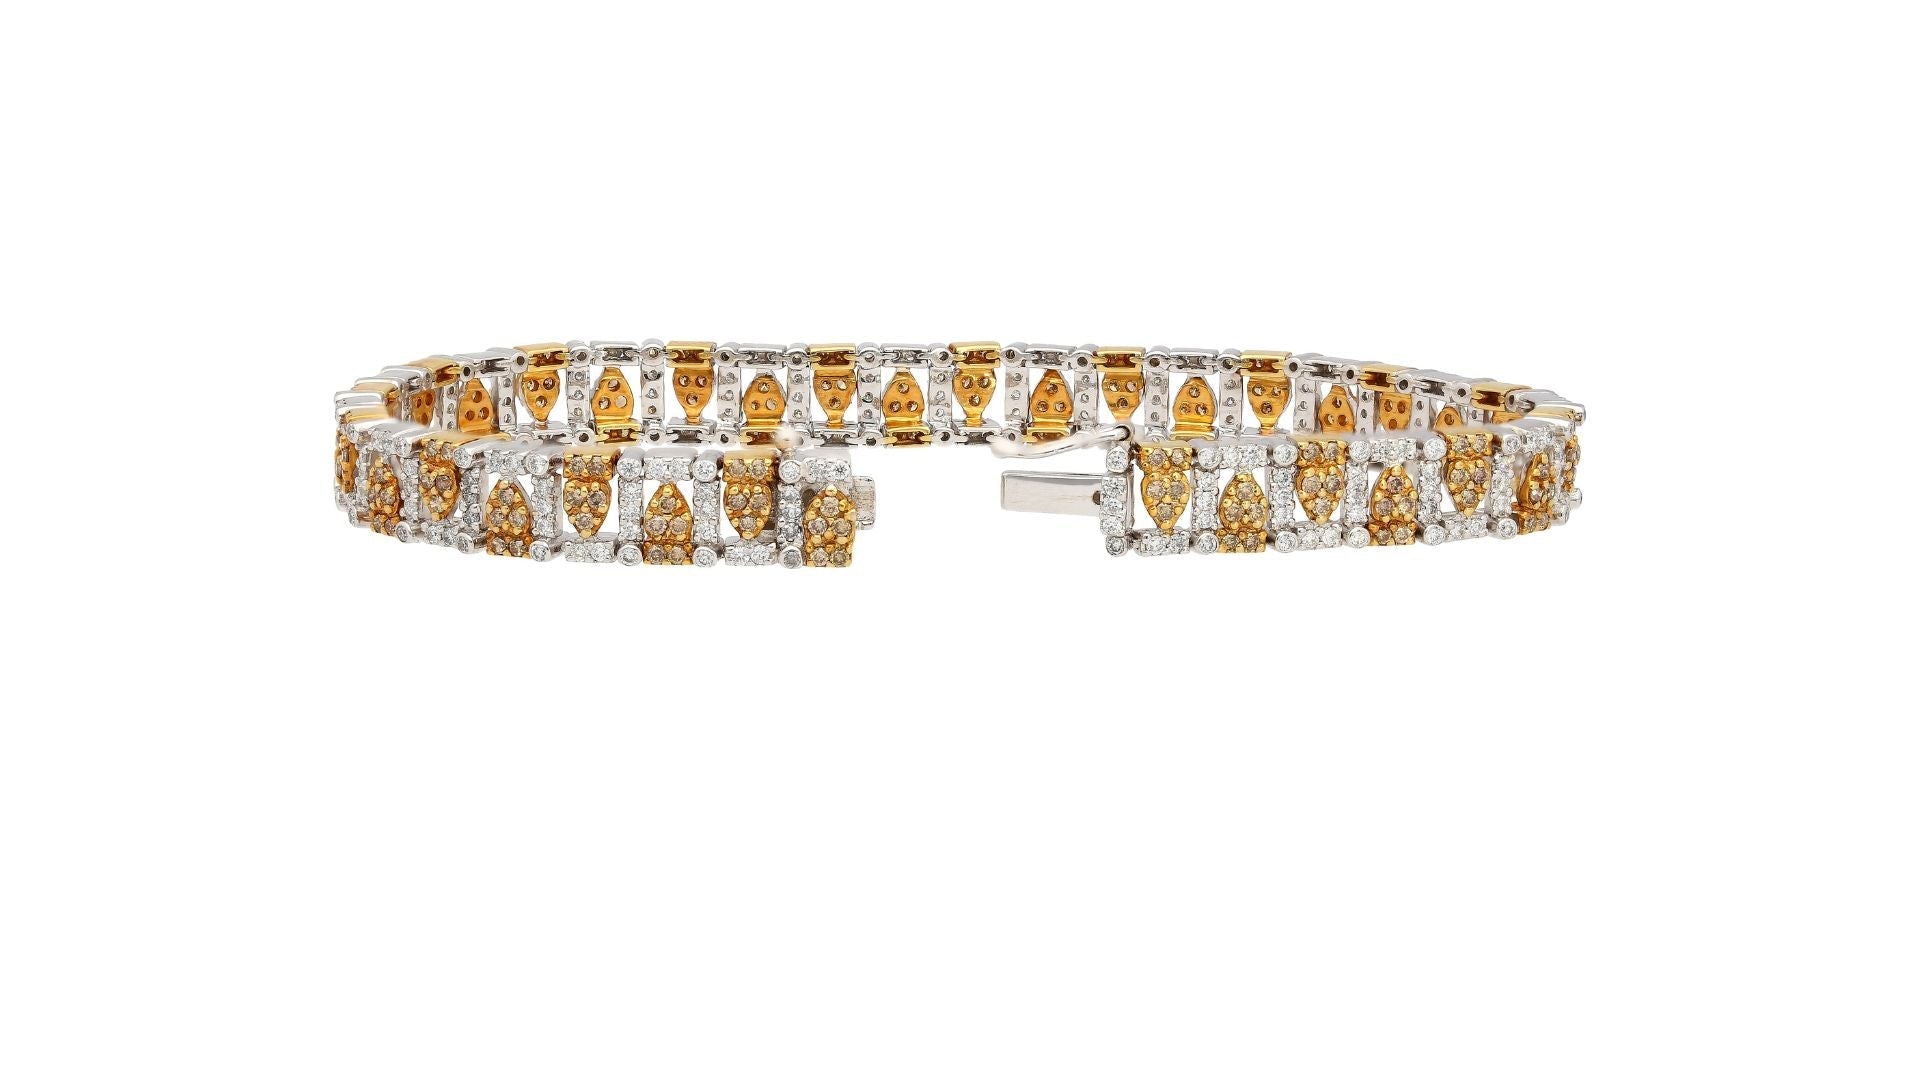 3.22 Carat TW Fancy Brown and White Diamonds in Patterned 18K White and Yellow Gold Bracelet | 7 inches